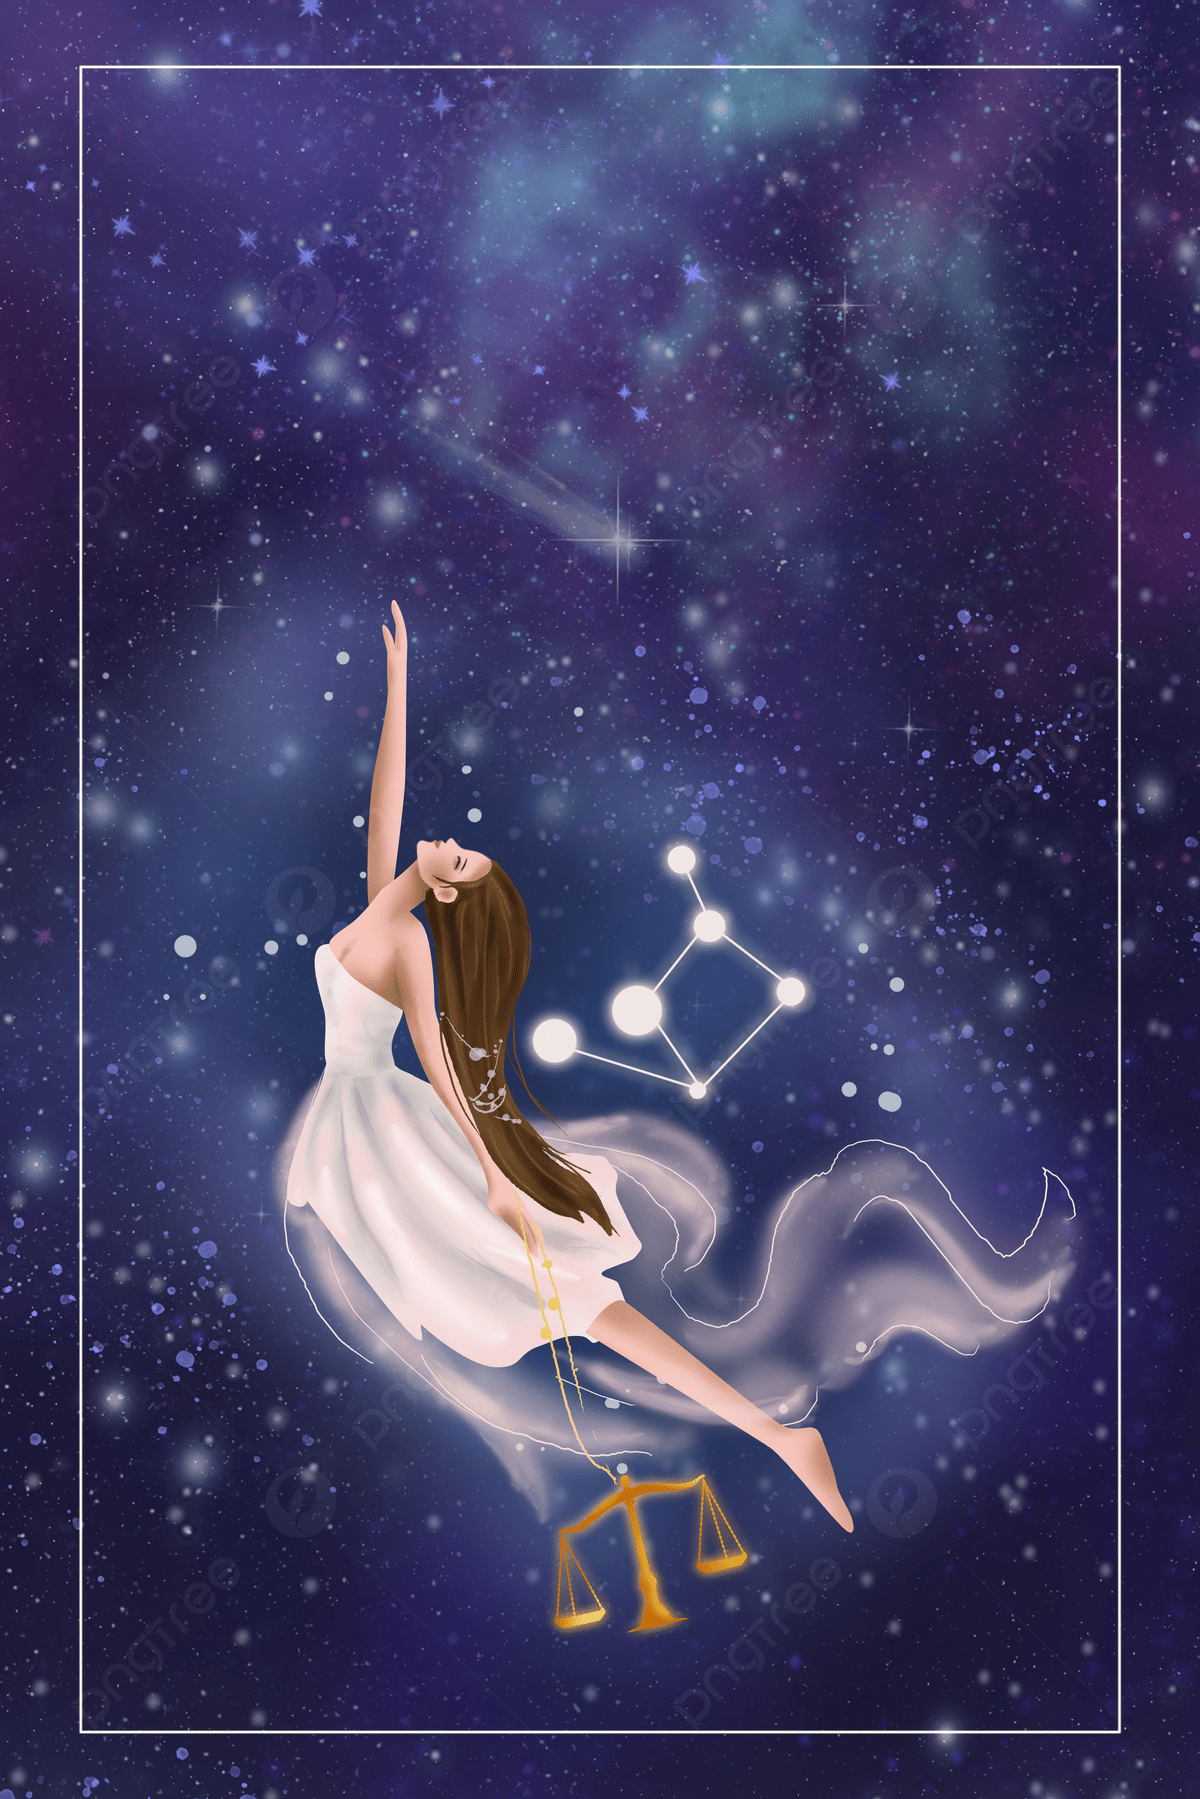 A woman in white dress holding scales and stars - Libra